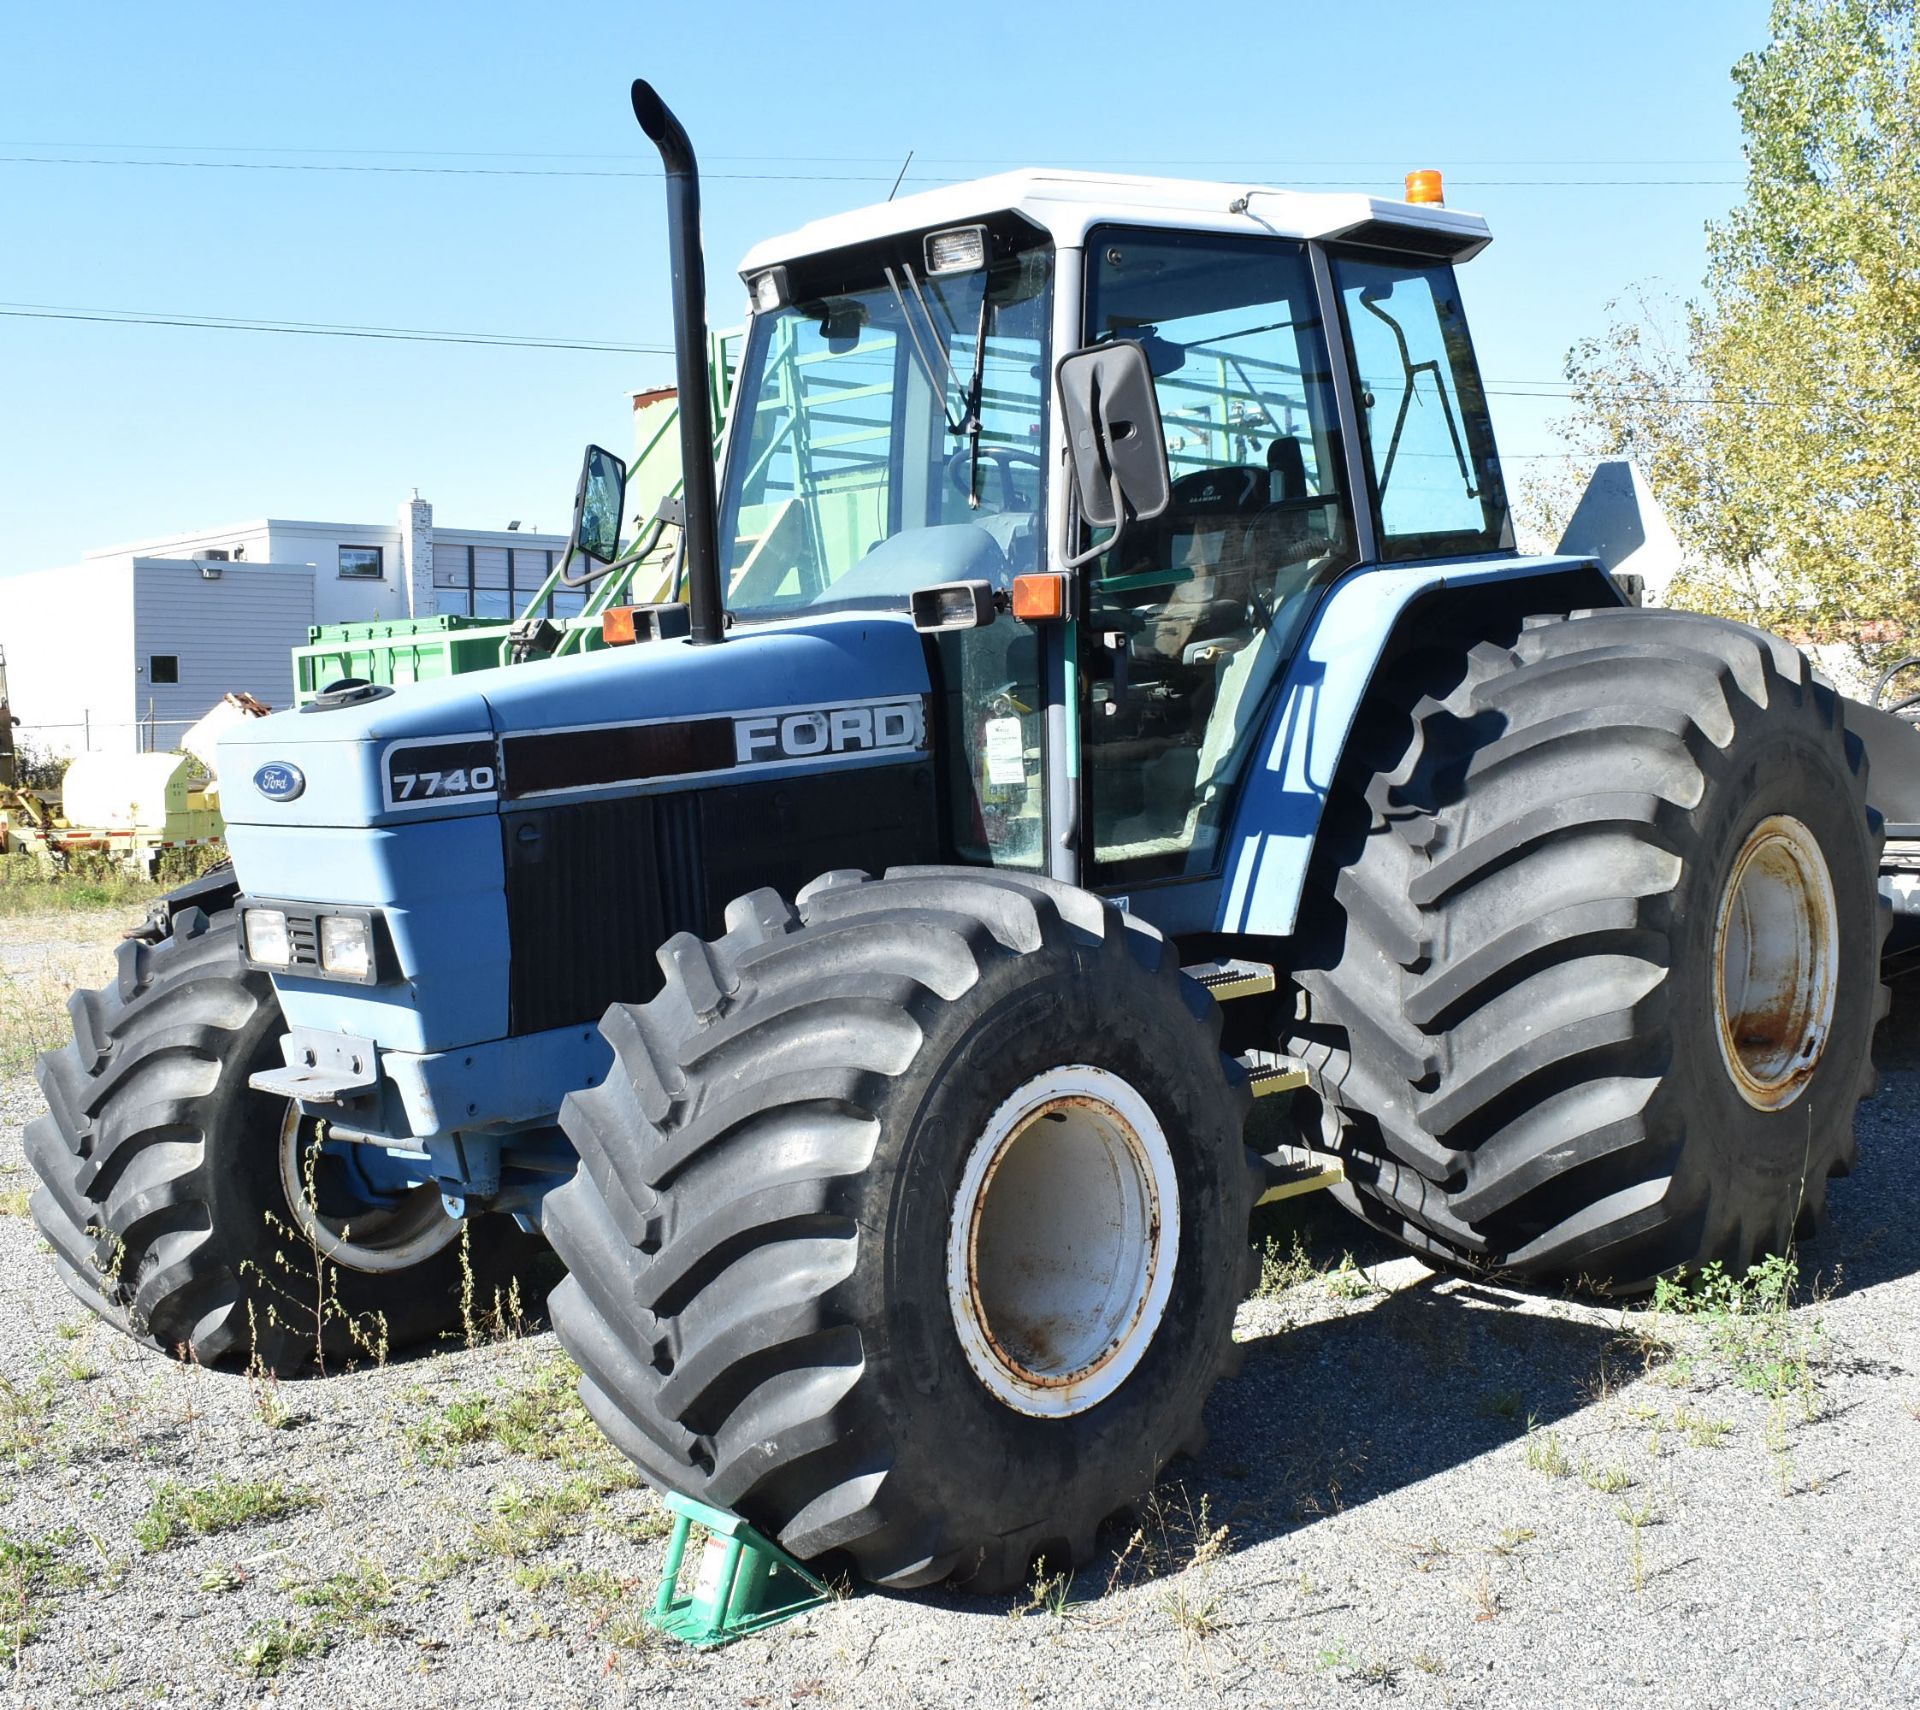 FORD 7740 ROW-CROP TRACTOR WITH FORD 5.0L 4 CYLINDER DIESEL ENGINE, CLIMATE CONTROL, AM/FM RADIO - Image 2 of 9